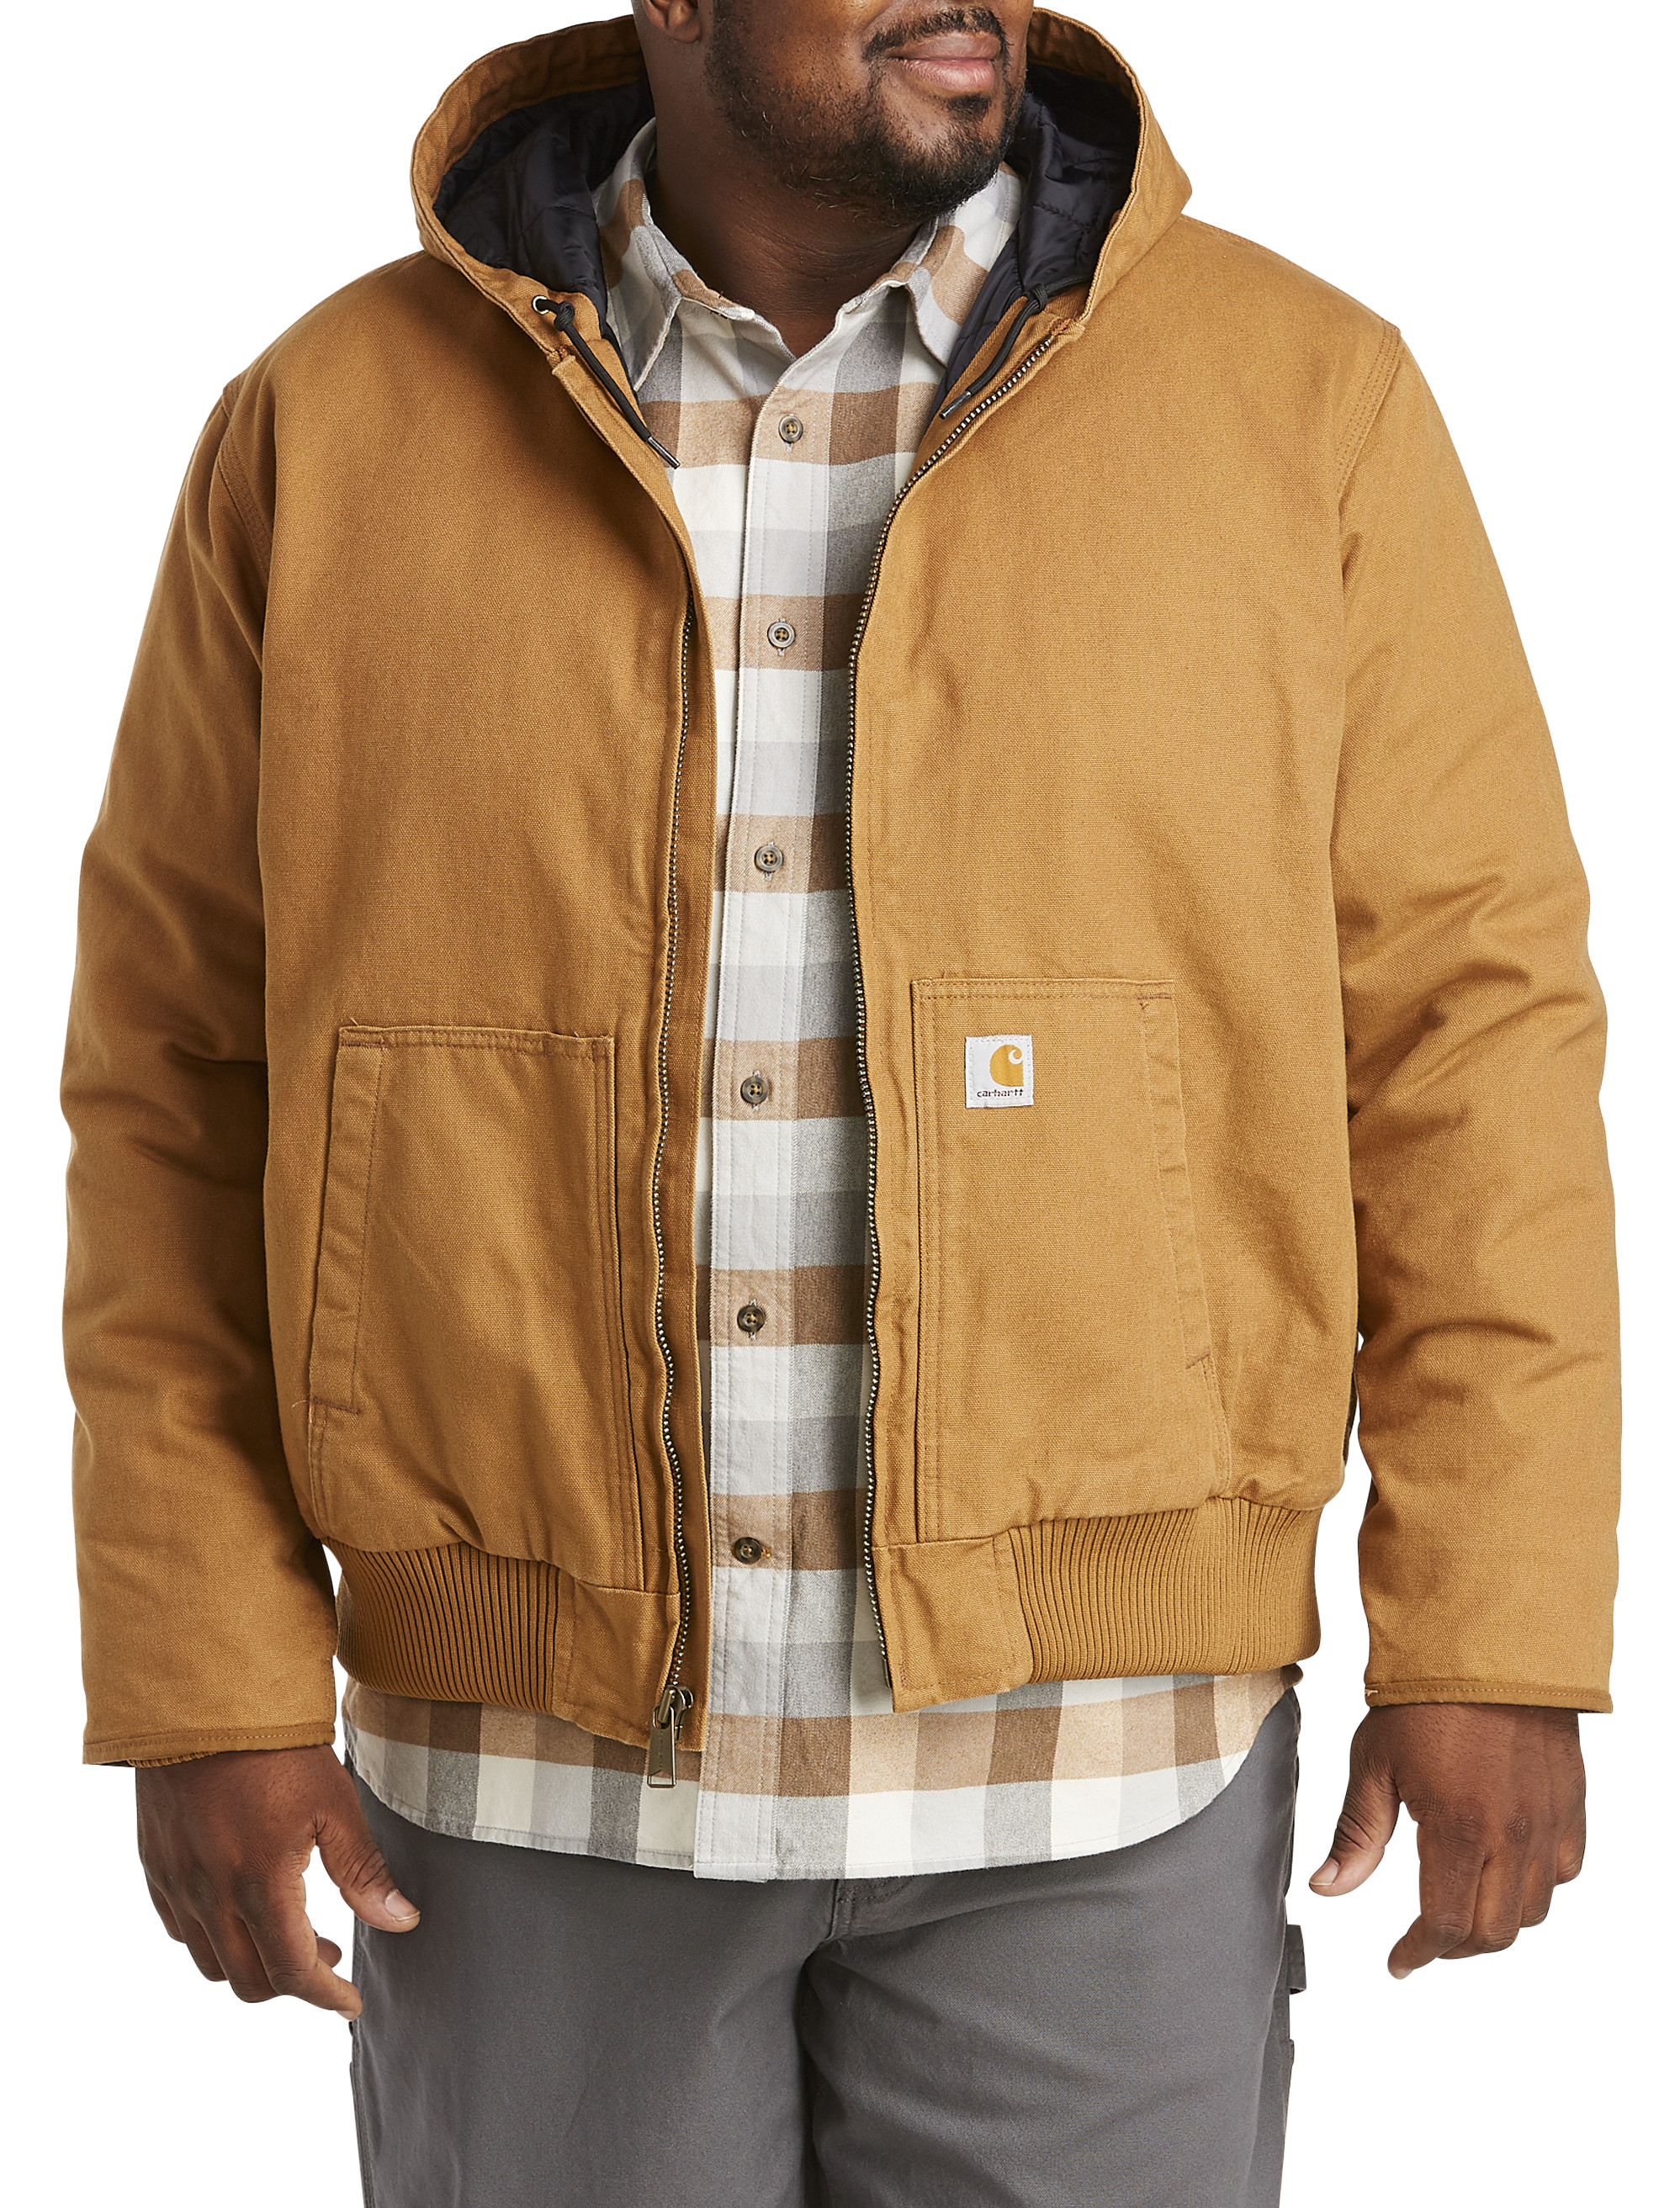 Big + Tall   Carhartt Loose Fit Washed Duck Insulated Jacket   DXL